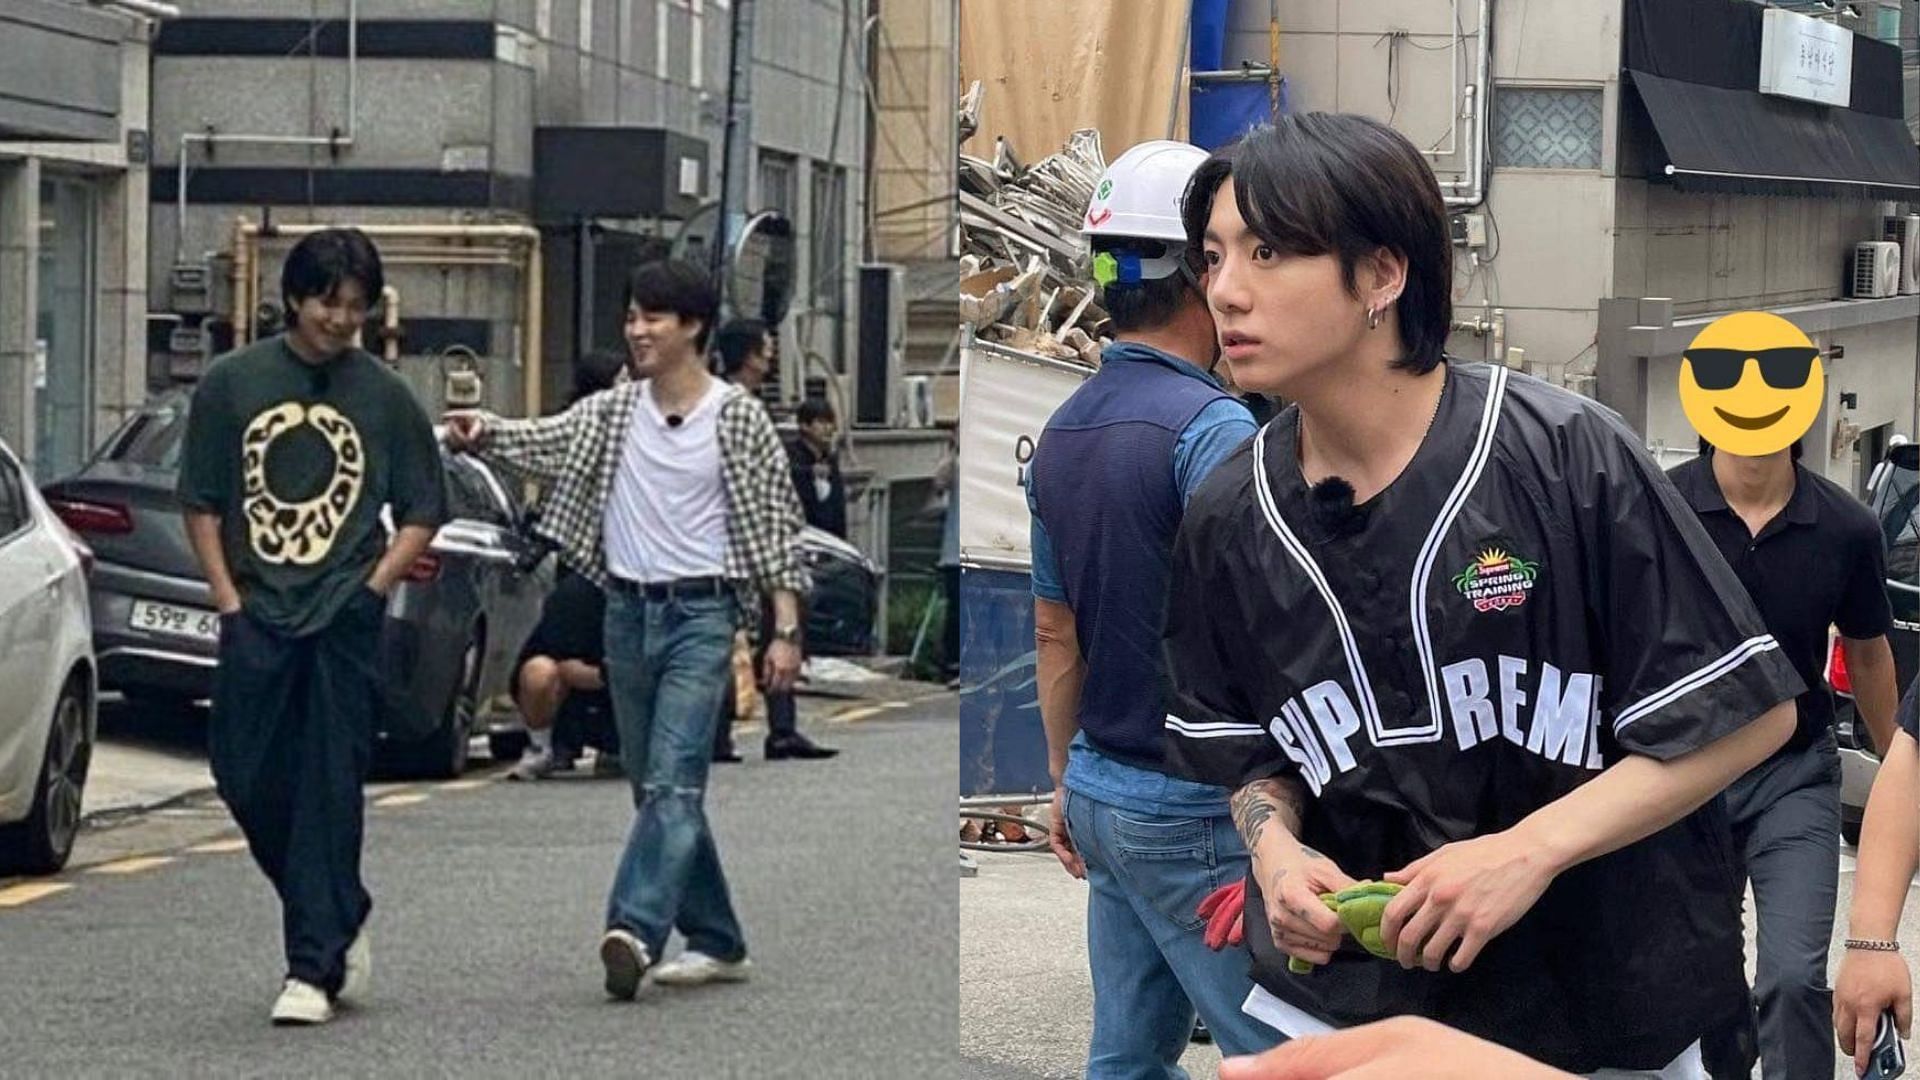 The Dynamite hit singers captured filming content in Seoul (Images via Twitter/@miidang and @613TB)